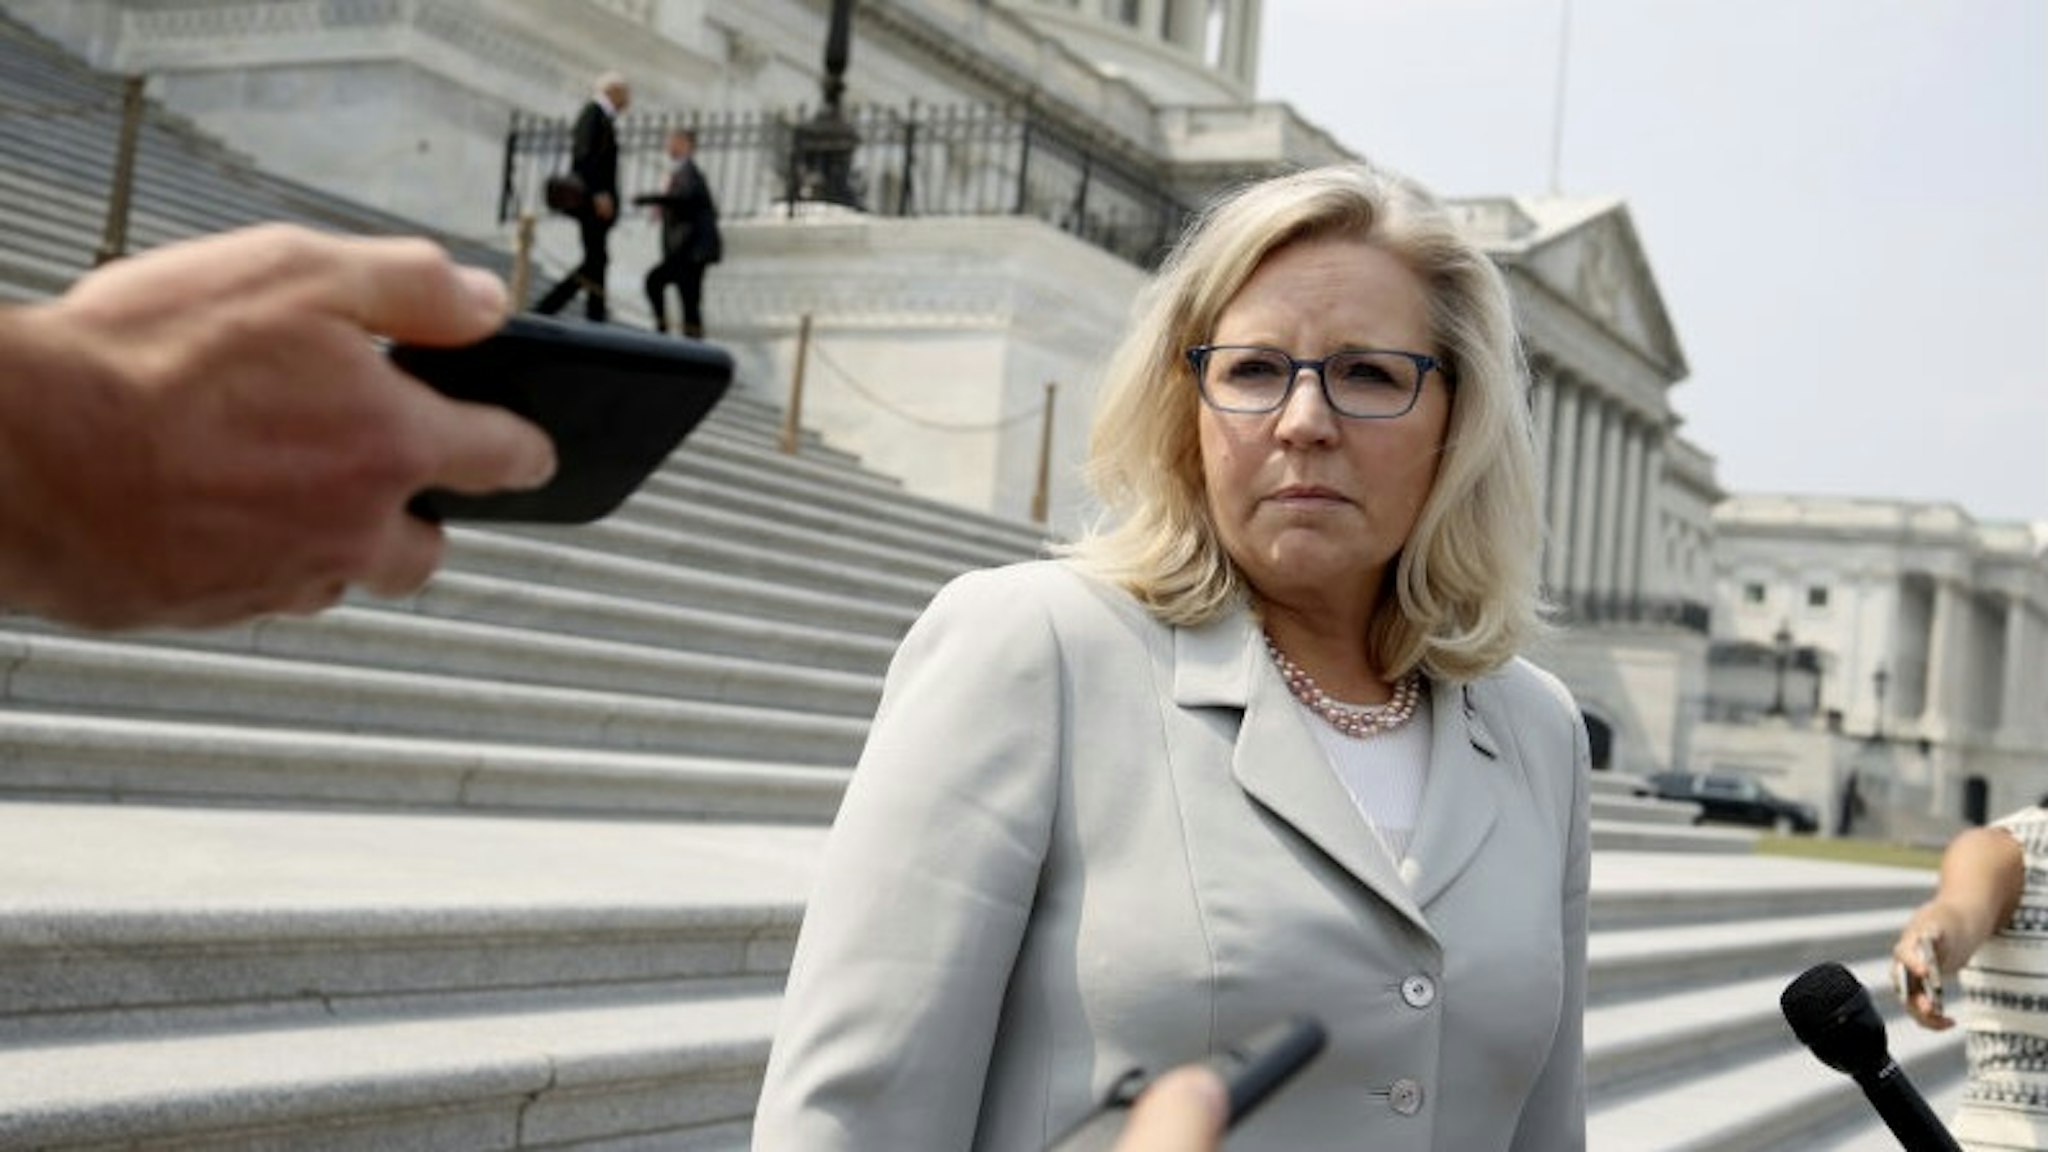 Liz Cheney Speaks To Press On Capitol Hill WASHINGTON, DC - JULY 21: U.S. Rep. Liz Cheney (R-WY) speaks to reporters outside of the U.S. Capitol on July 21, 2021 in Washington, DC. Cheney expressed her intention to stay on the committee investigating the January 6th riots after the decision by Speaker of the House Nancy Pelosi (D-CA) to reject two of House Minority Leader McCarthy's picks for the committee. (Photo by Anna Moneymaker/Getty Images) Anna Moneymaker / Staff via Getty Images